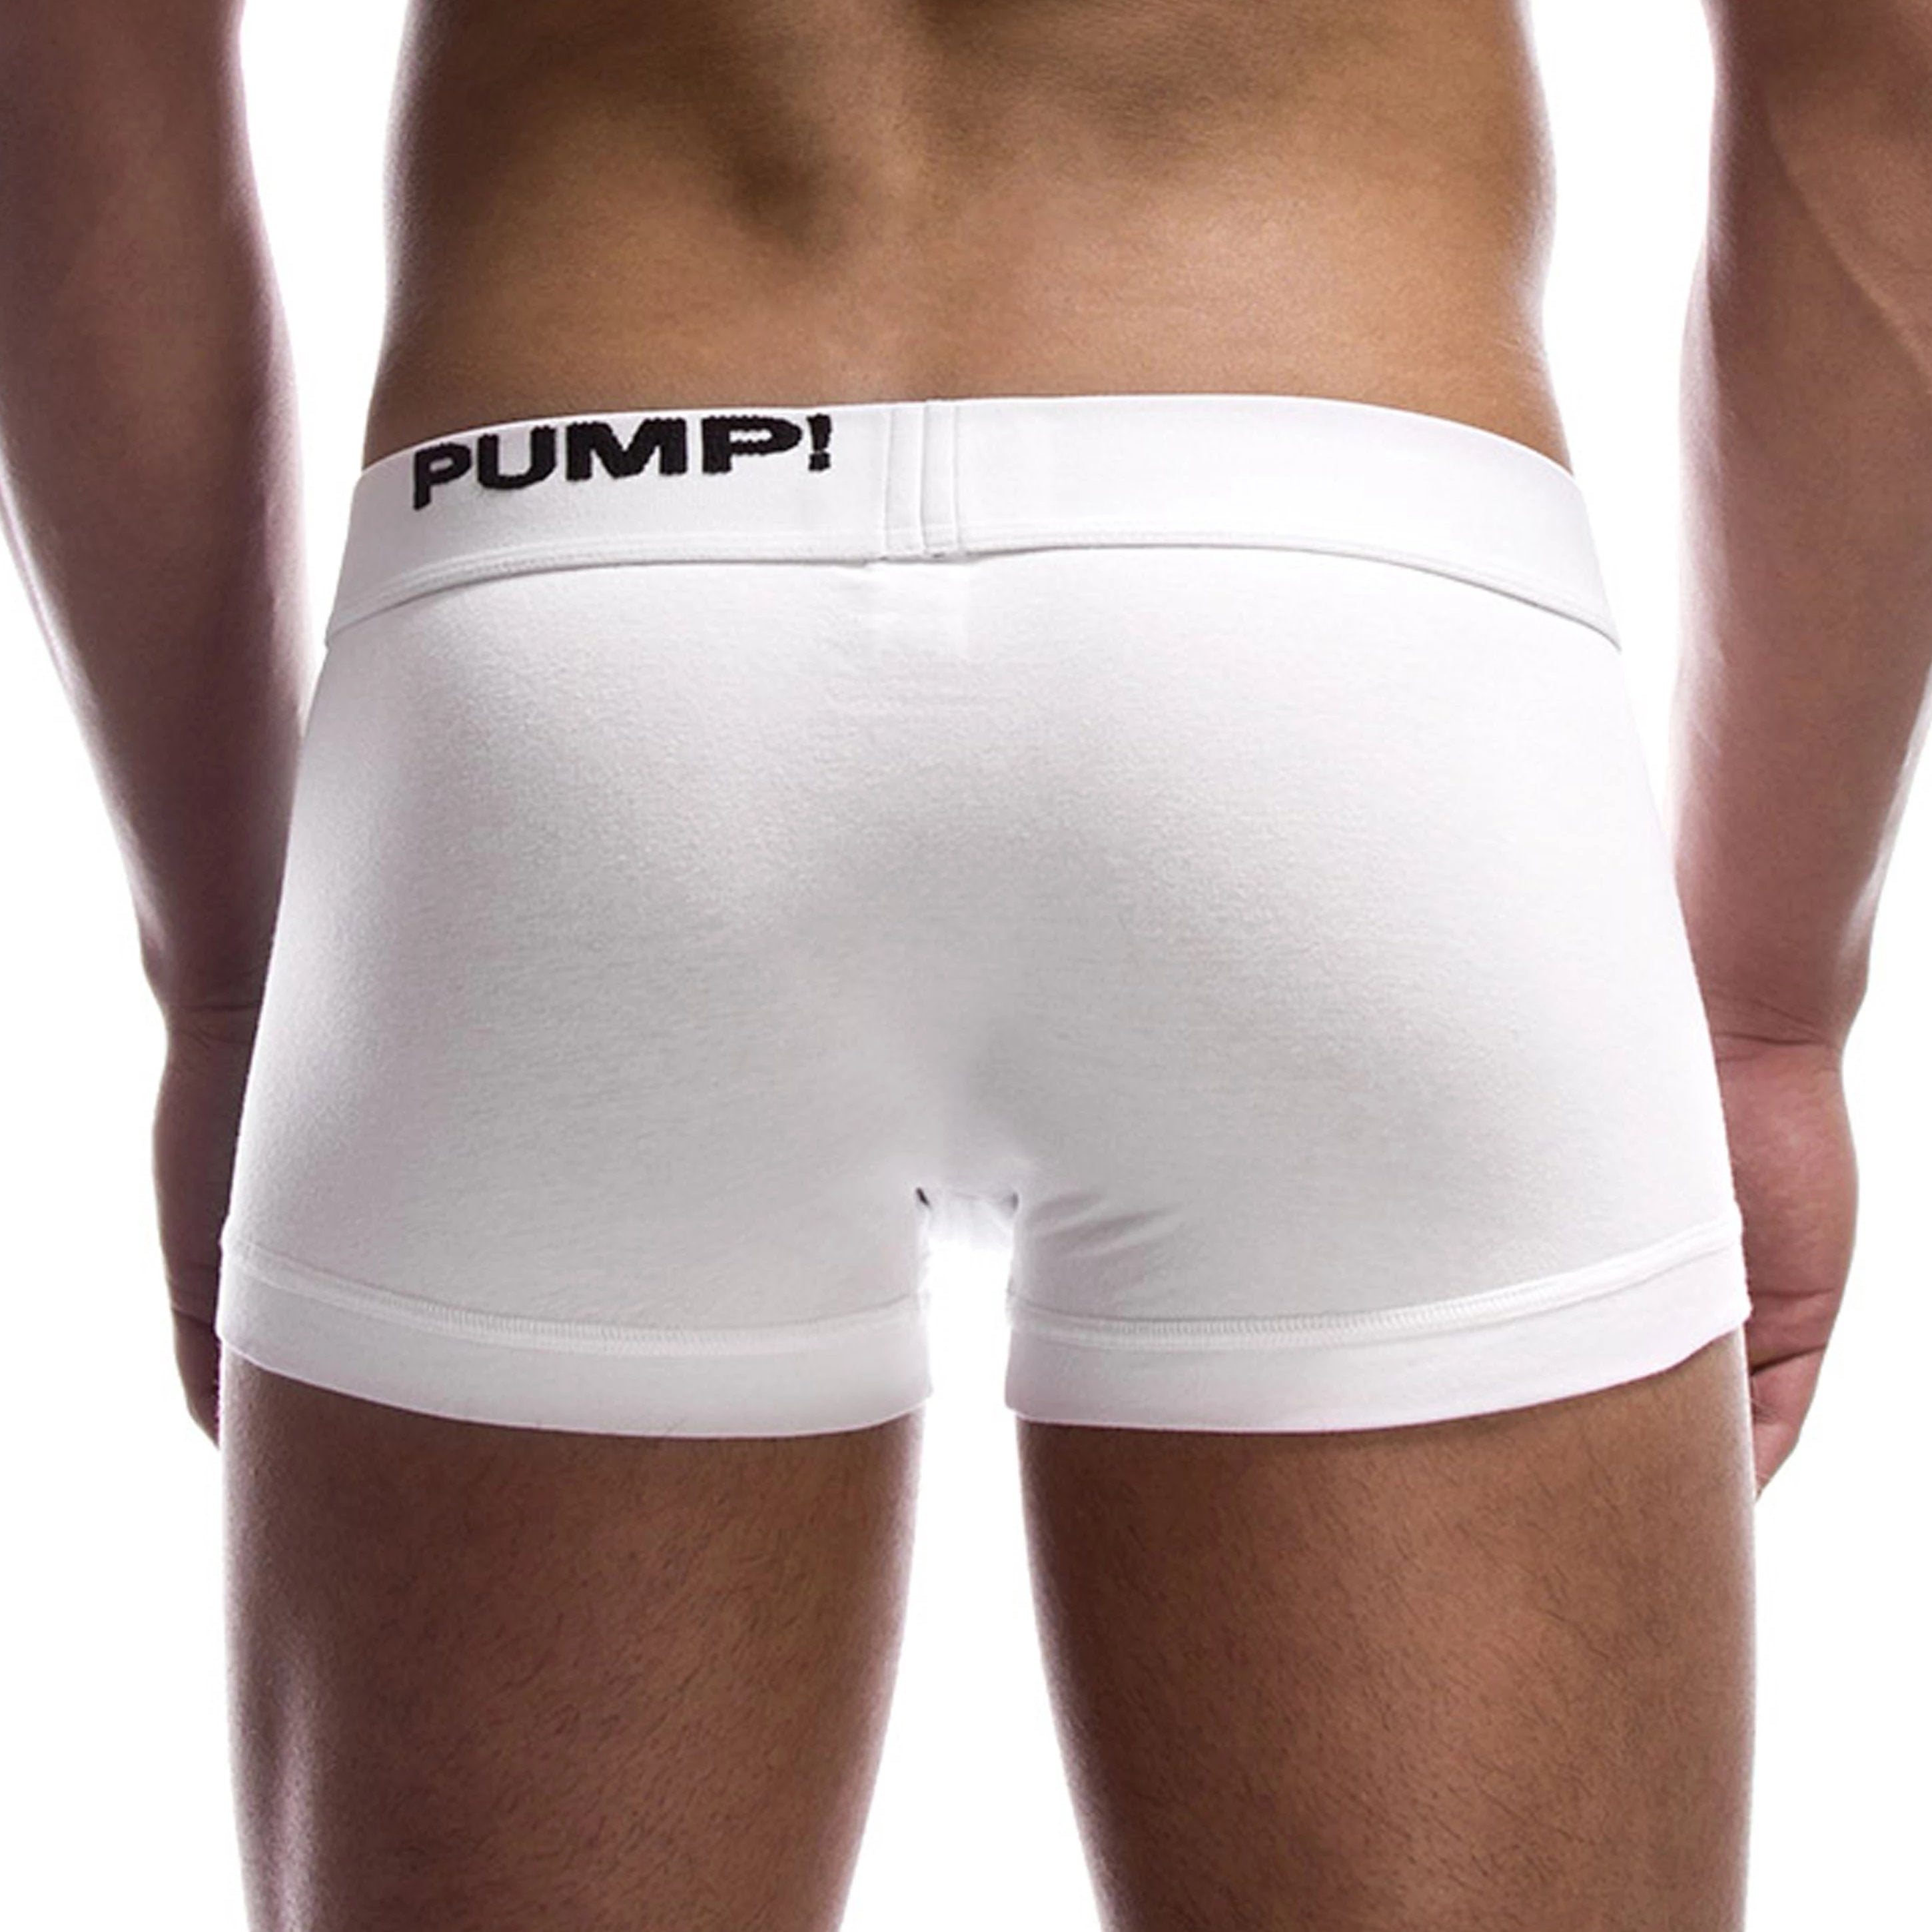 Classic Boxer - White Back by PUMP! Underwear at Trenderwear.com